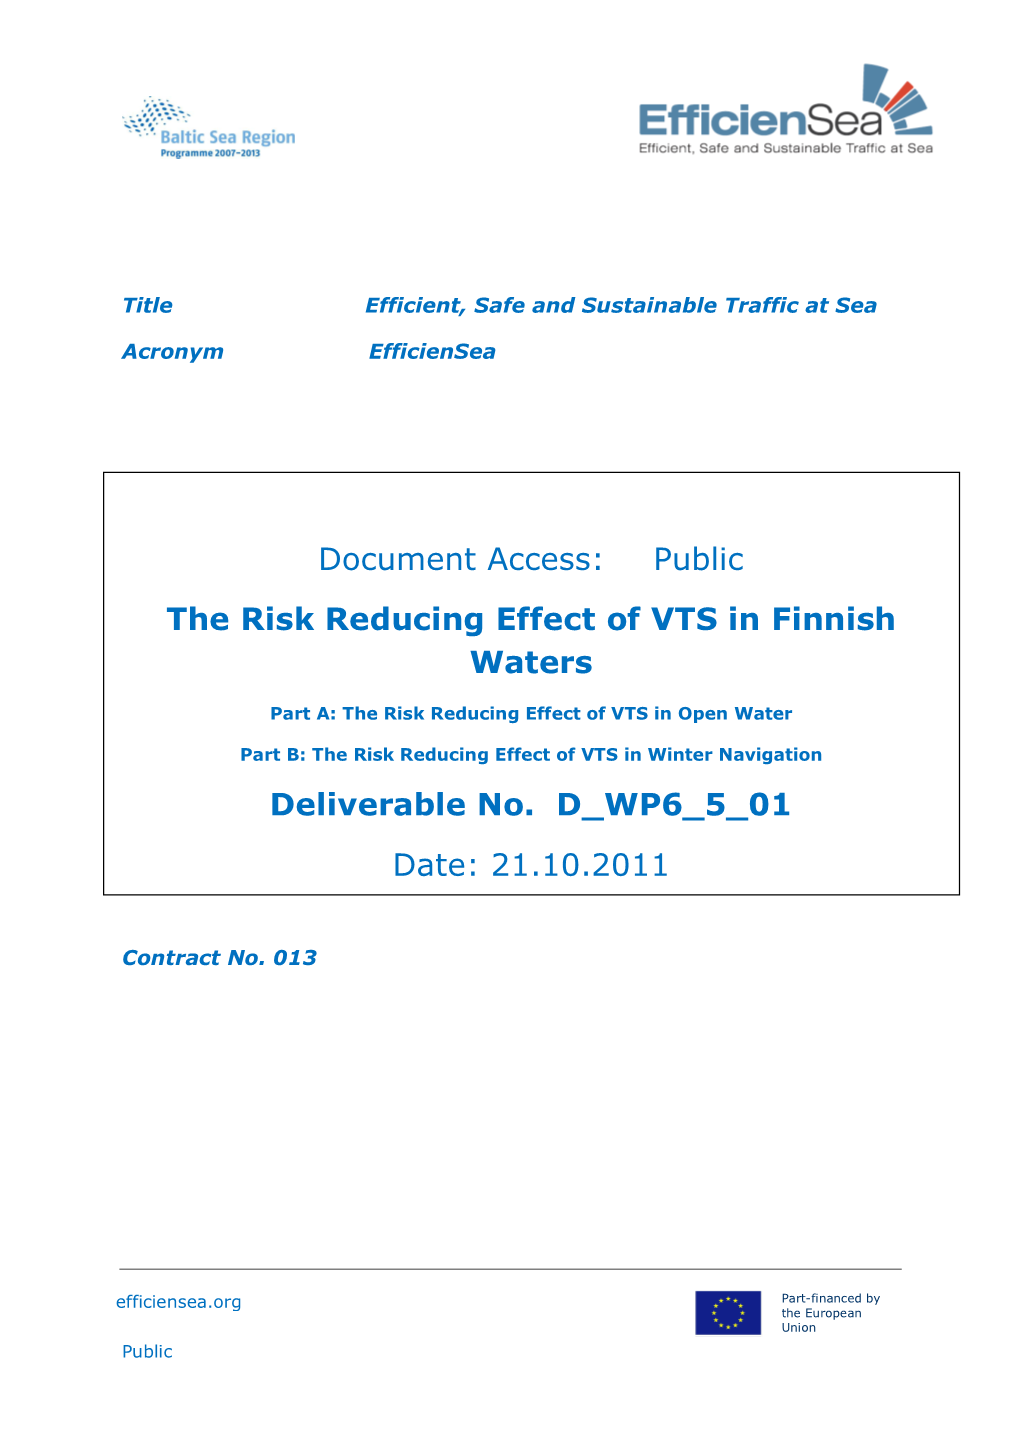 Public the Risk Reducing Effect of VTS in Finnish Waters Deliverable No. D WP6 5 01 Date